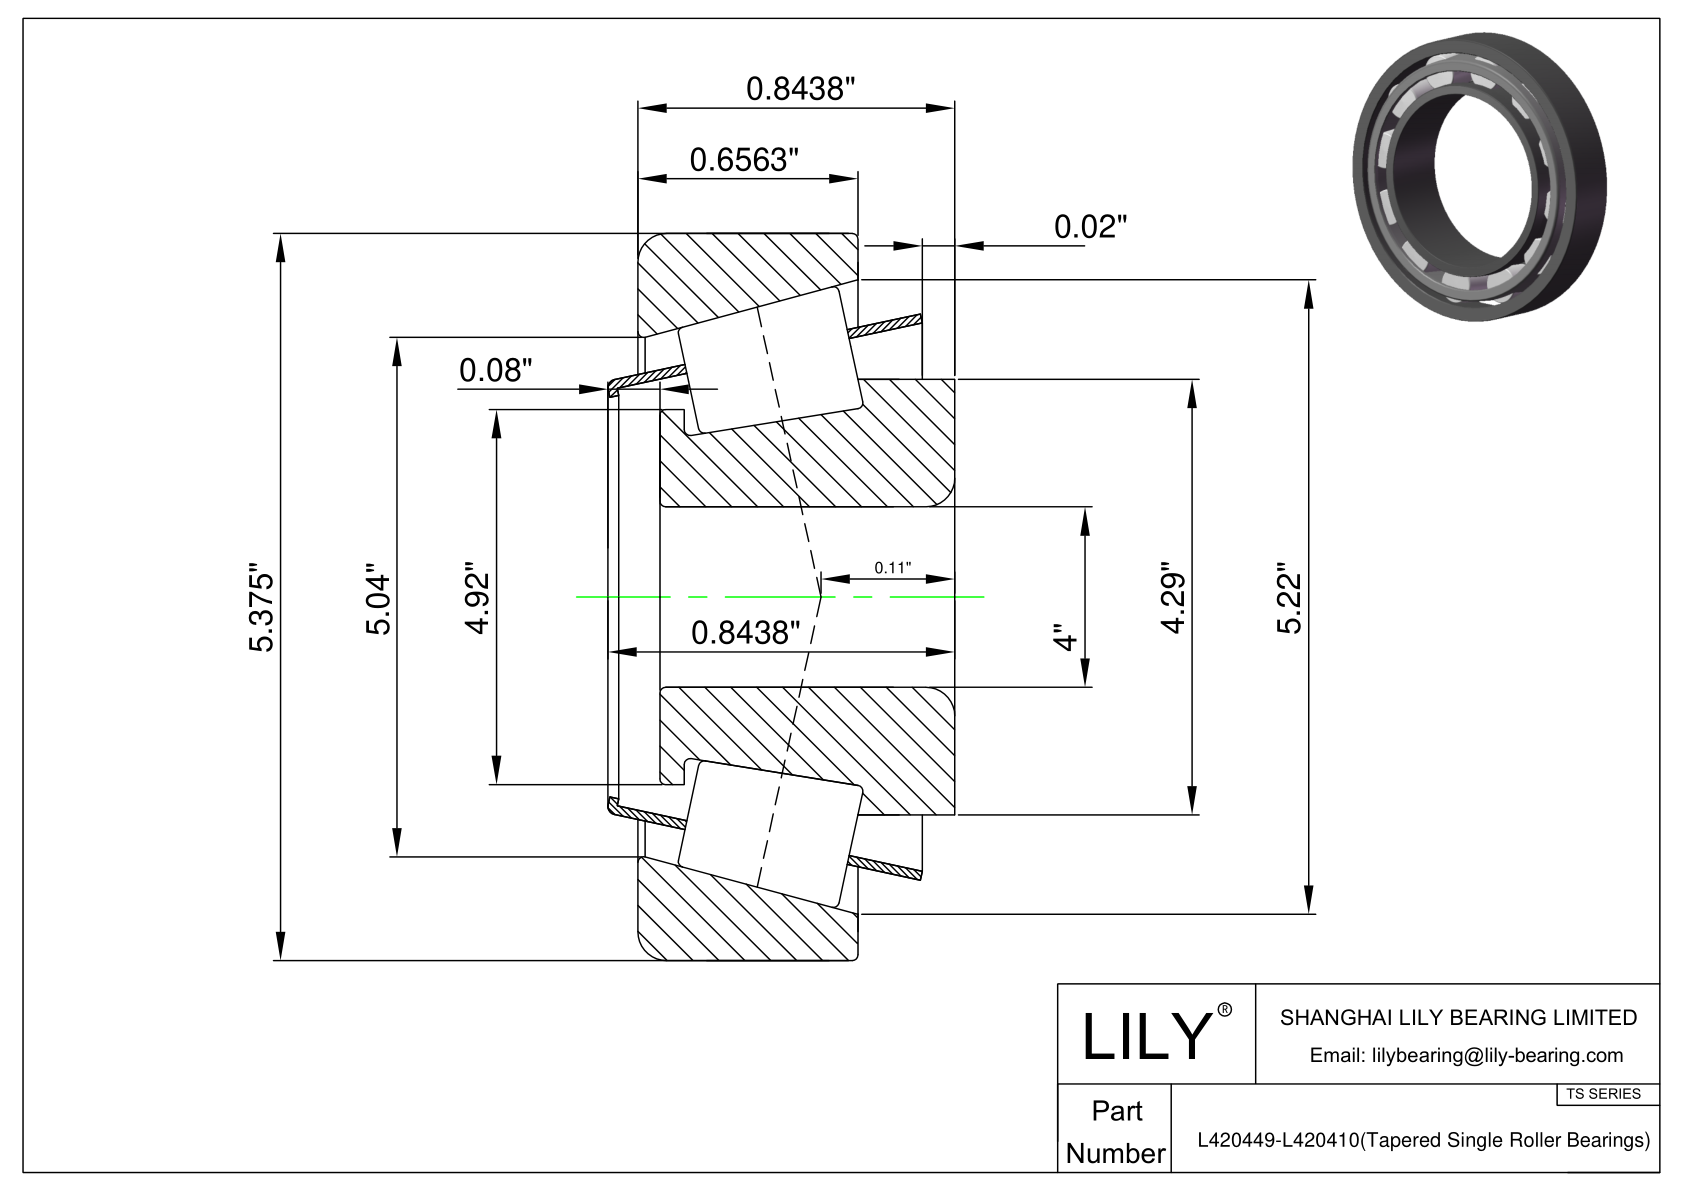 L420449-L420410 TS (Tapered Single Roller Bearings) (Imperial) cad drawing